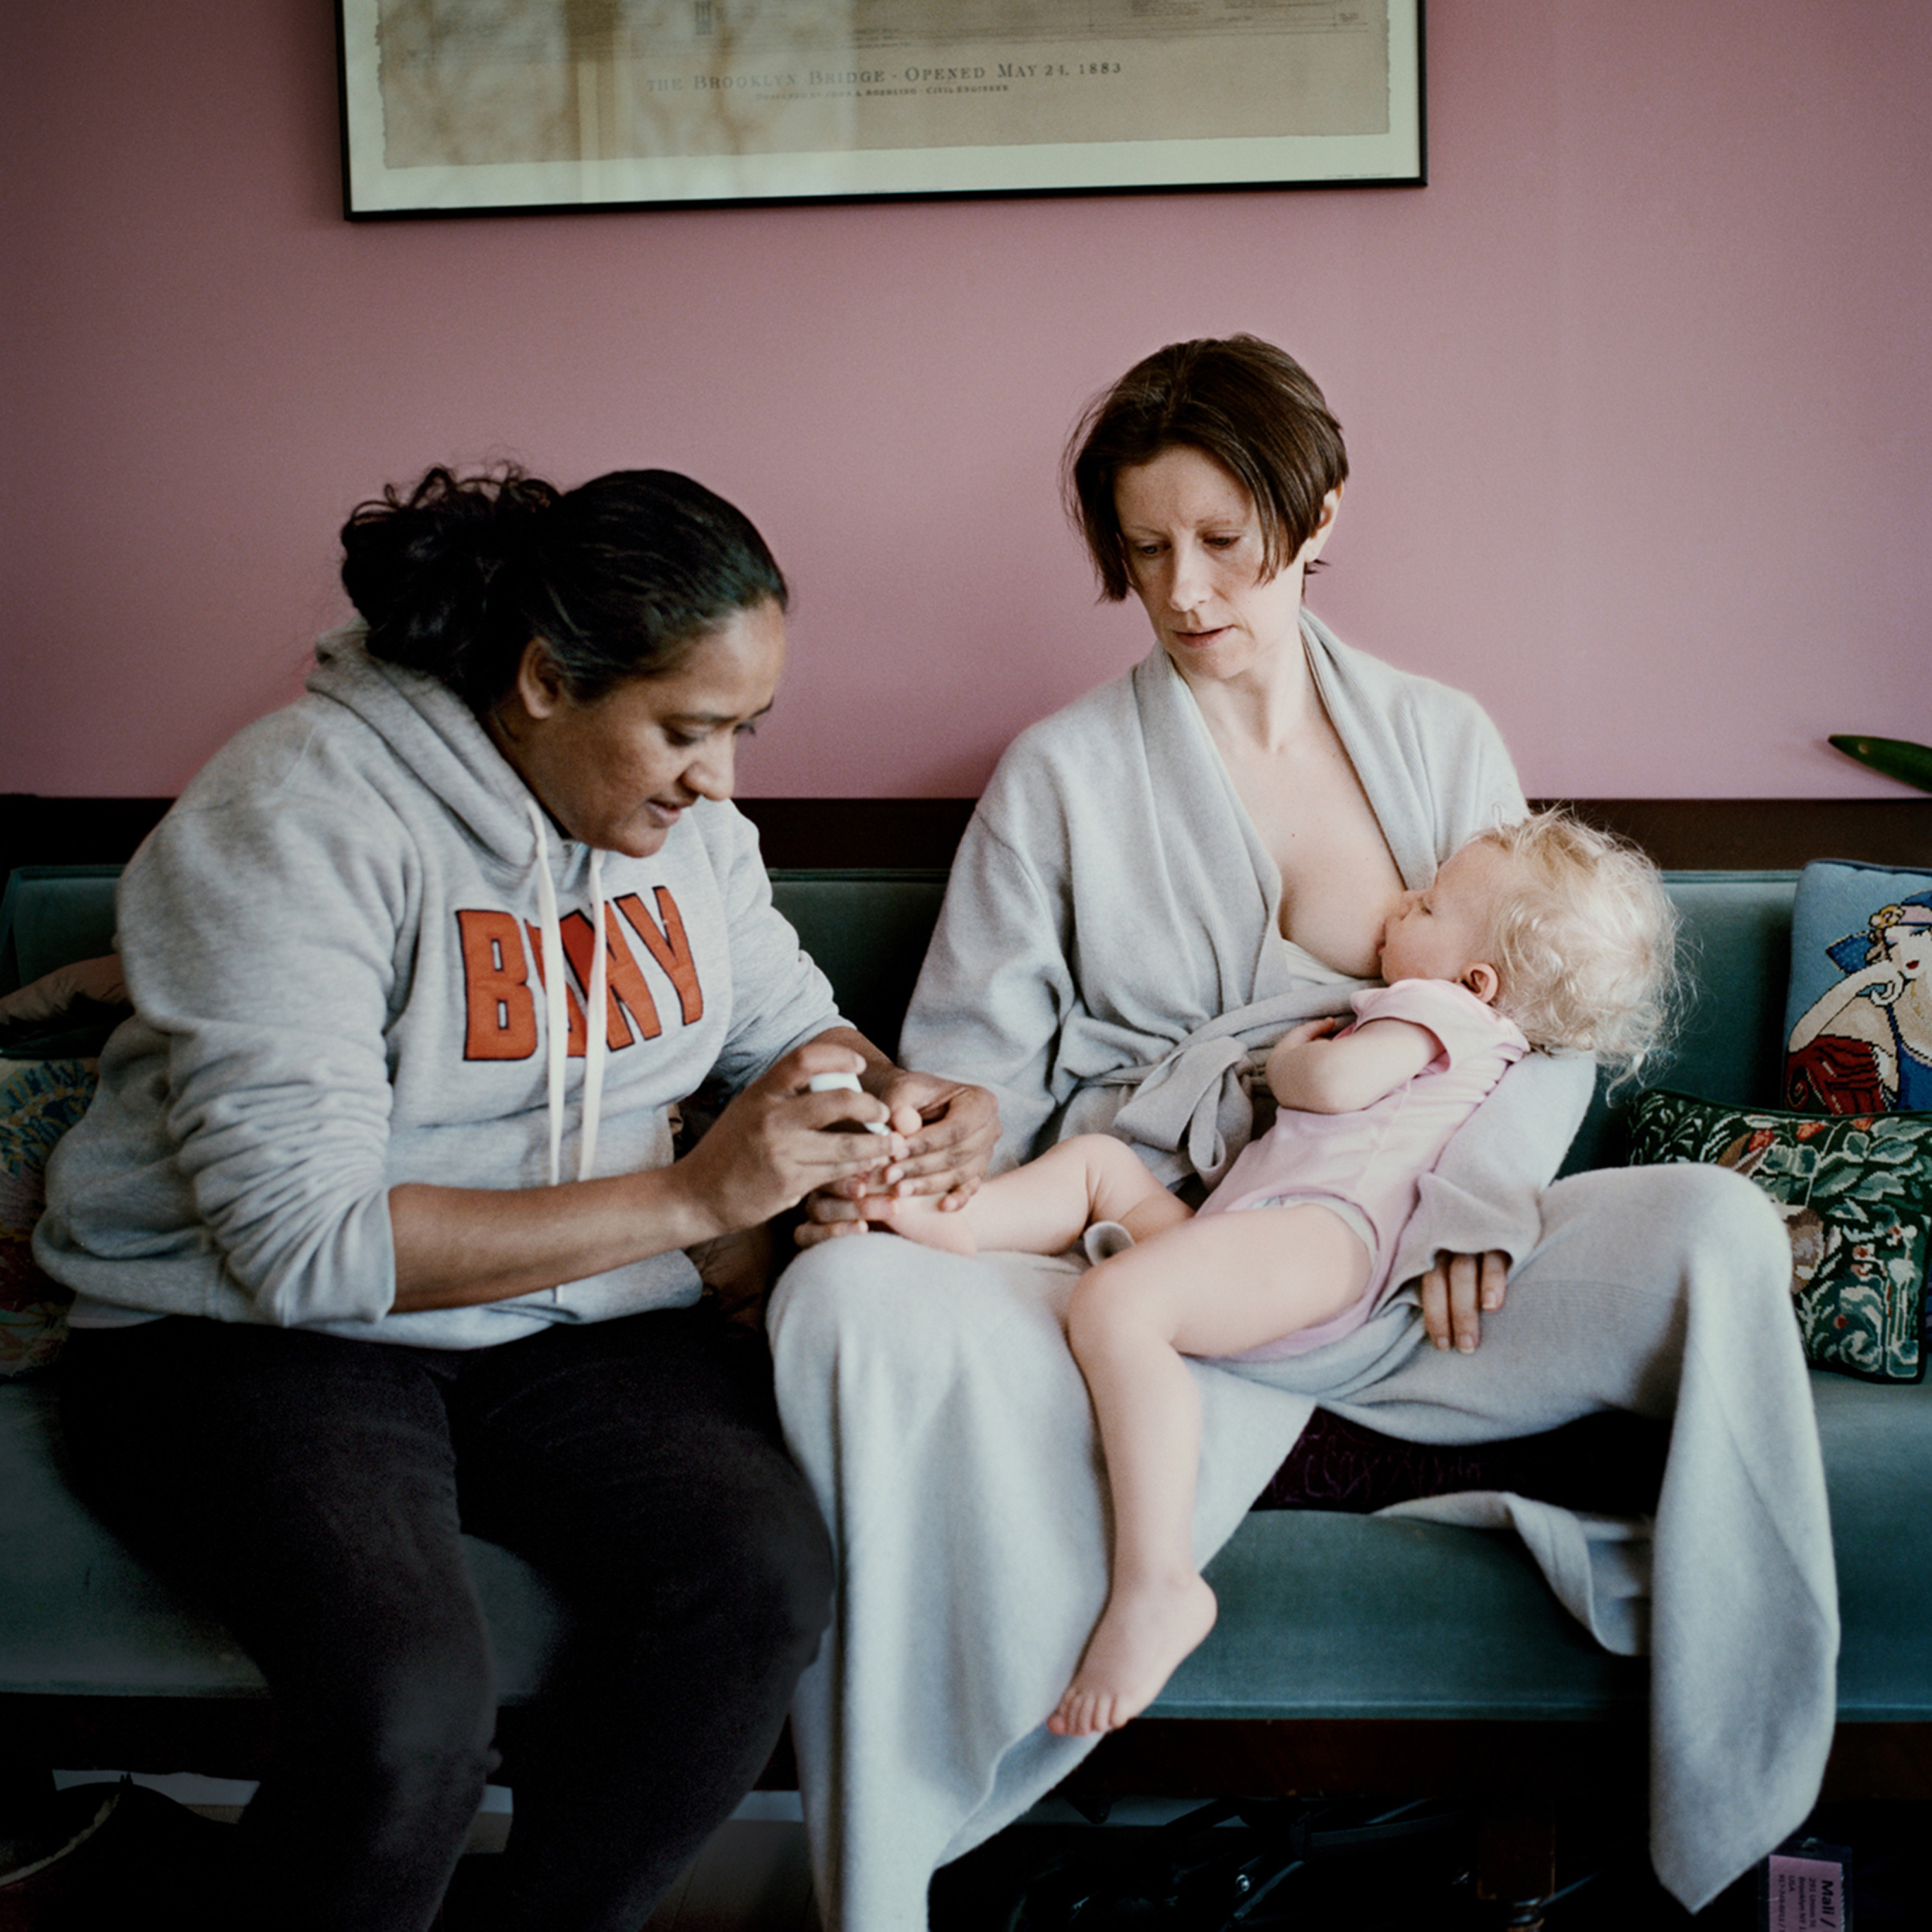 Rachel Kahan nurses her daughter Michaela, while nanny Annie Nabbie trims the child's toenails. "At What Cost?," Oct. 21 issue. (Anastasia Taylor-Lind for TIME)